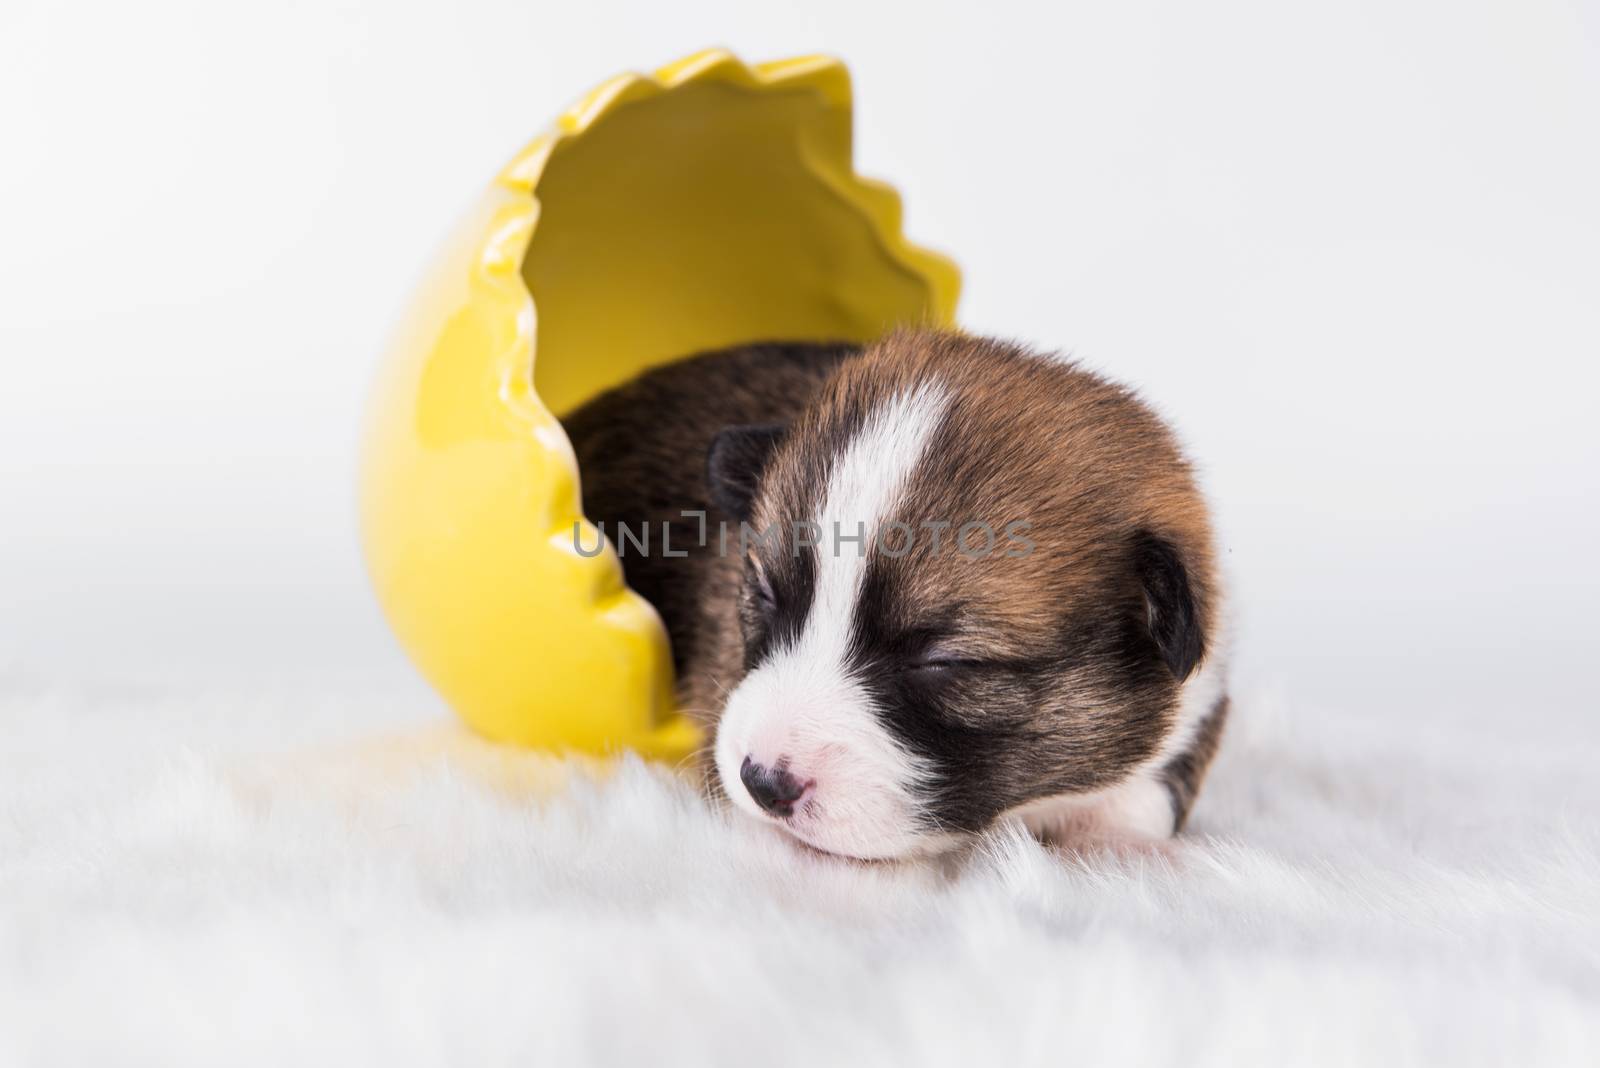 Funny Pembroke Welsh Corgi puppy dog sitting in the egg isolated on white background on Easter holidays